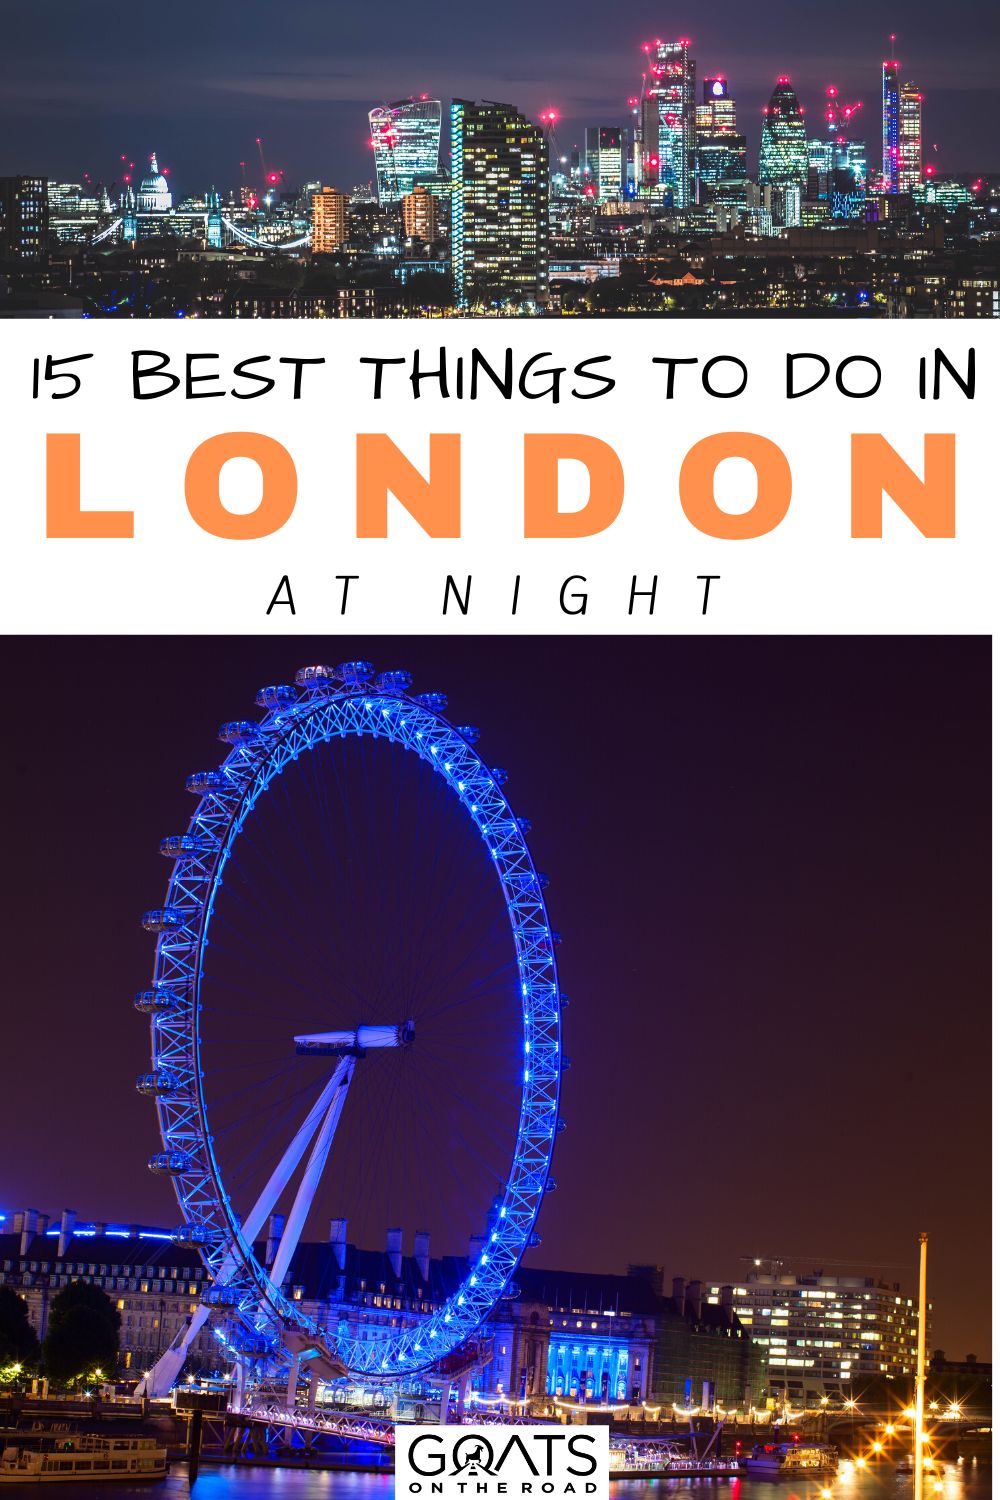 “15 Best Things to do in London at Night